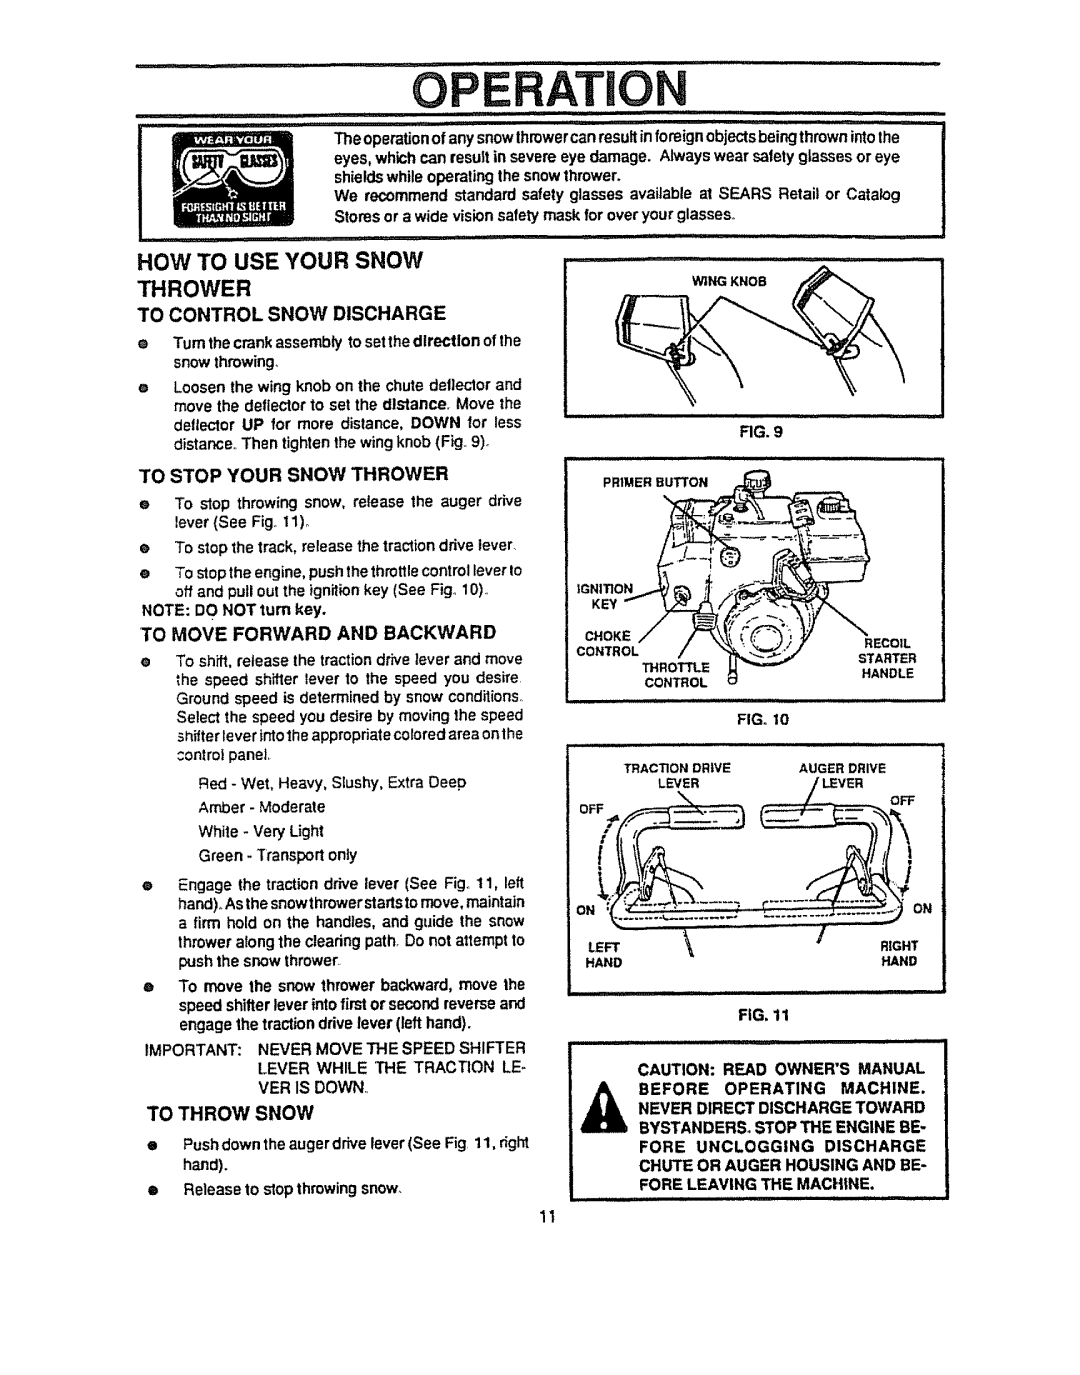 Sears 536.884821 manual Operatio, How To Use Your Snow Thrower 